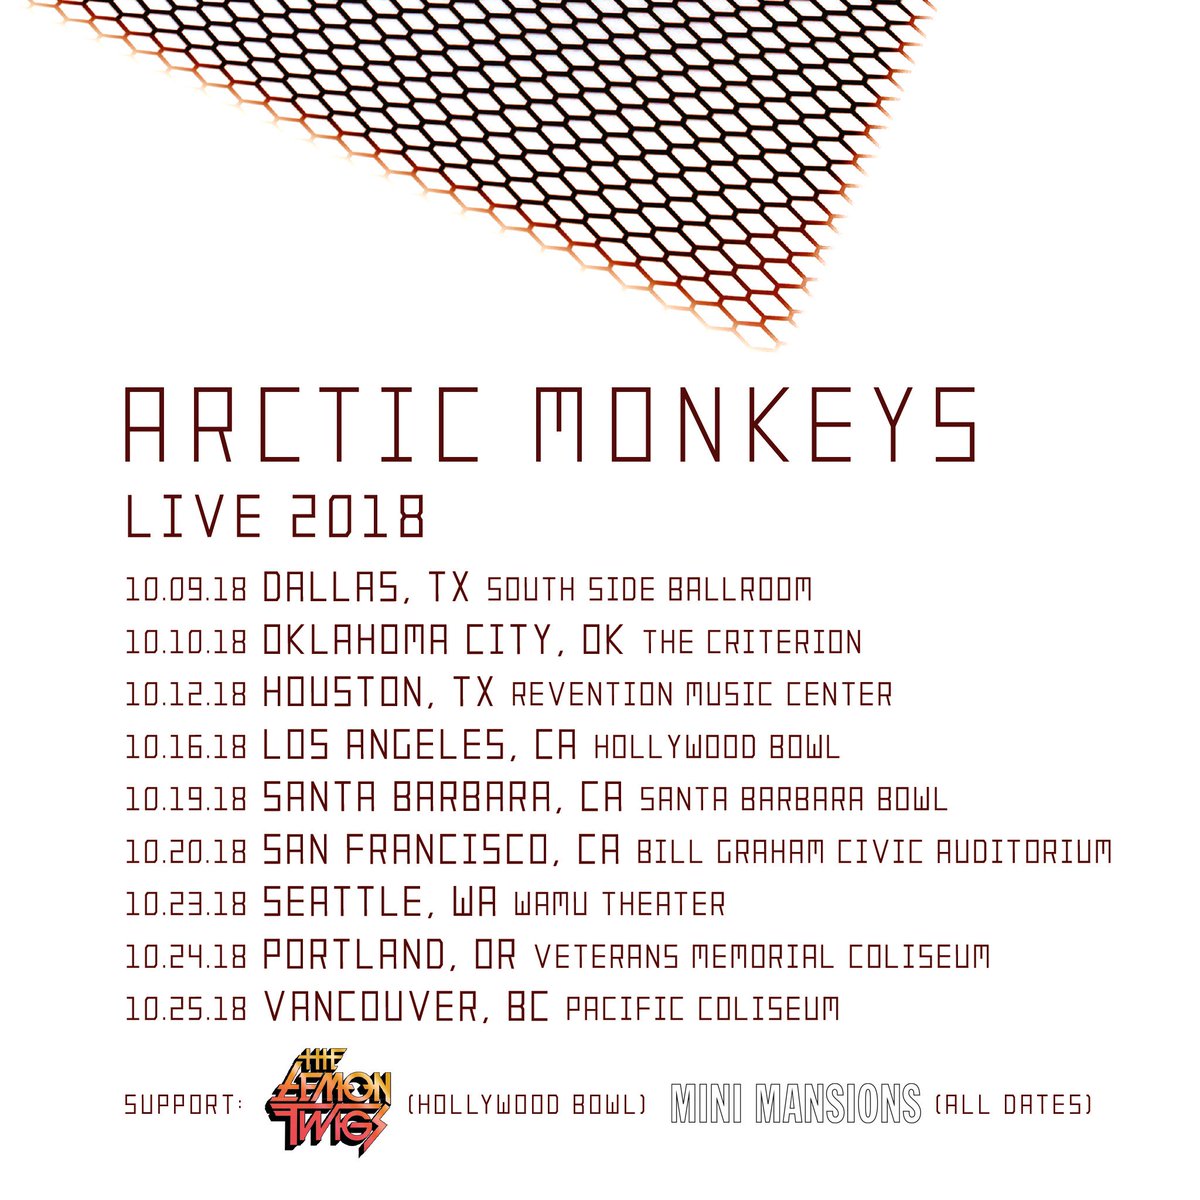 We're pleased to announce our North American live dates in October 2018. Tickets go on sale at 10am (Local time) on Friday 27 April. 
Support comes from @thelemontwigs for Hollywood Bowl only and @MiniMansions for all shows. For more information head to arcticmonkeys.com